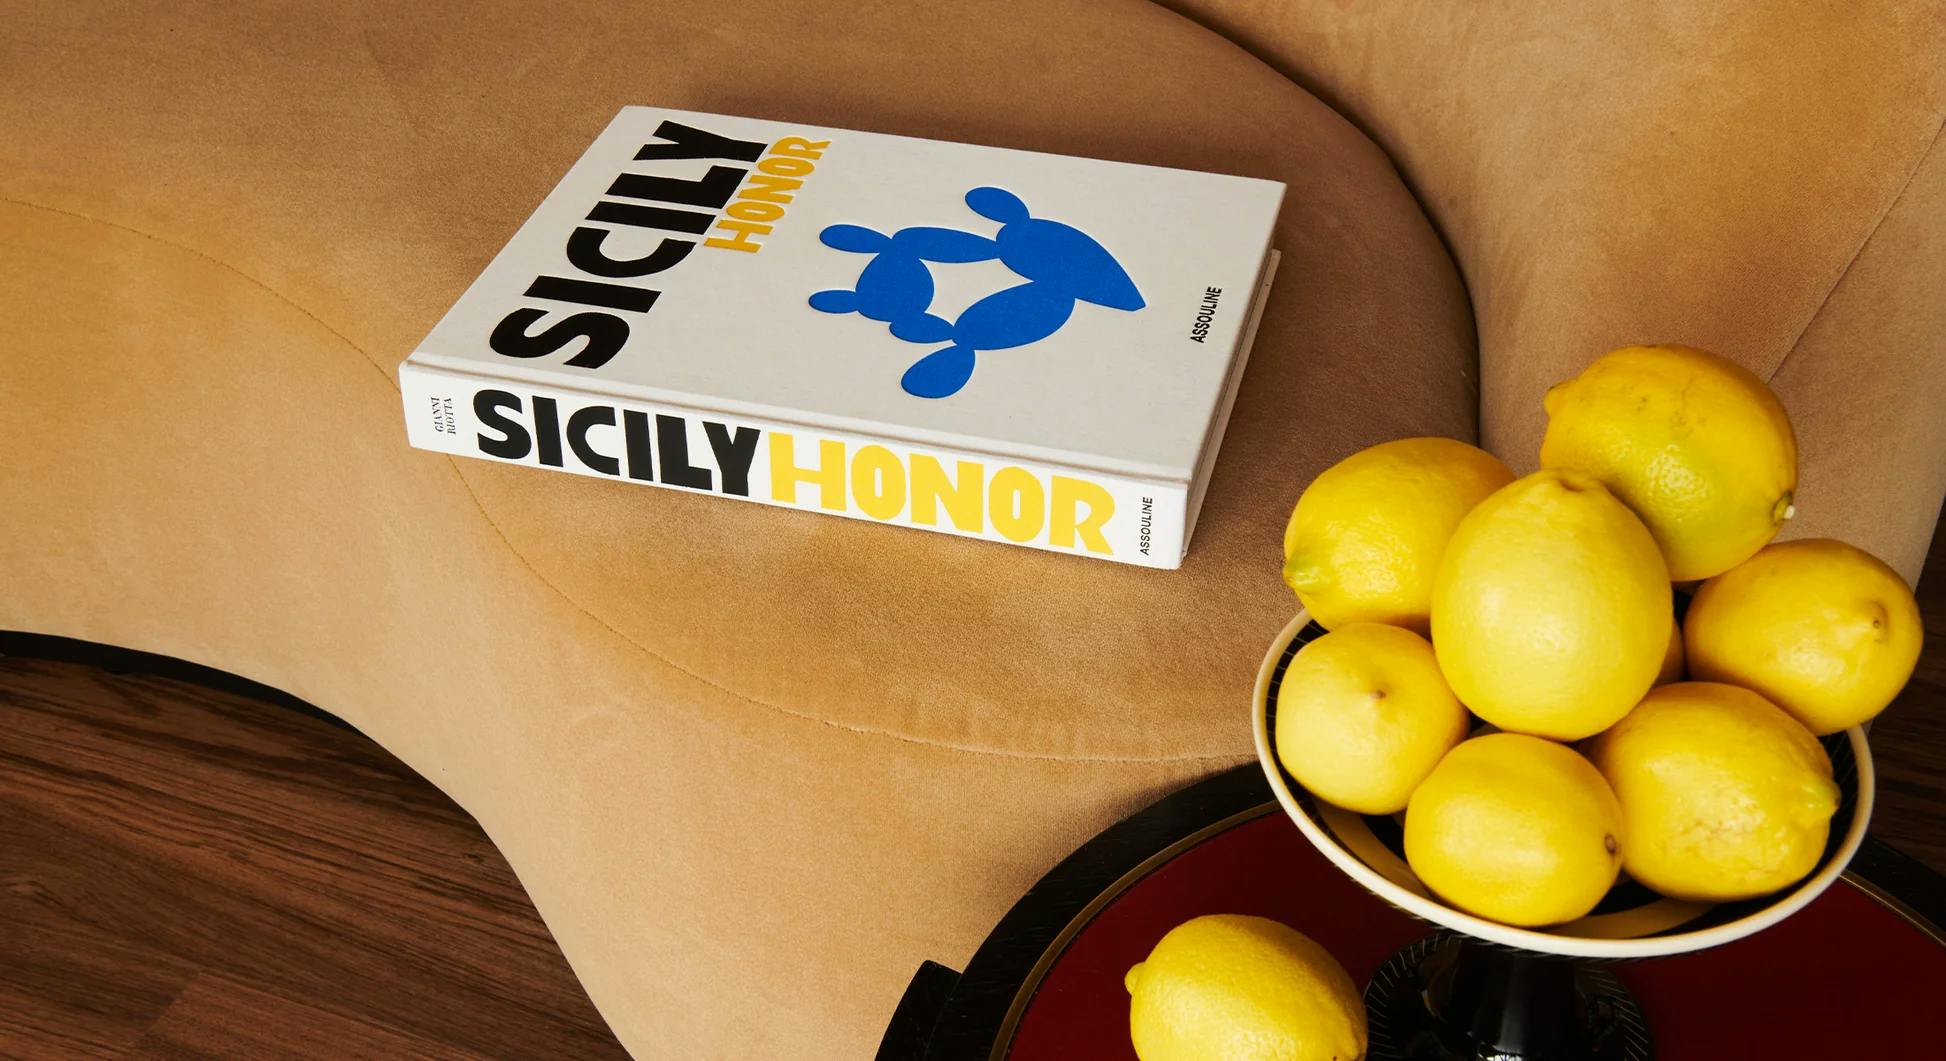 beautiful "sicily honor" book on a sofa, lemons in foreground